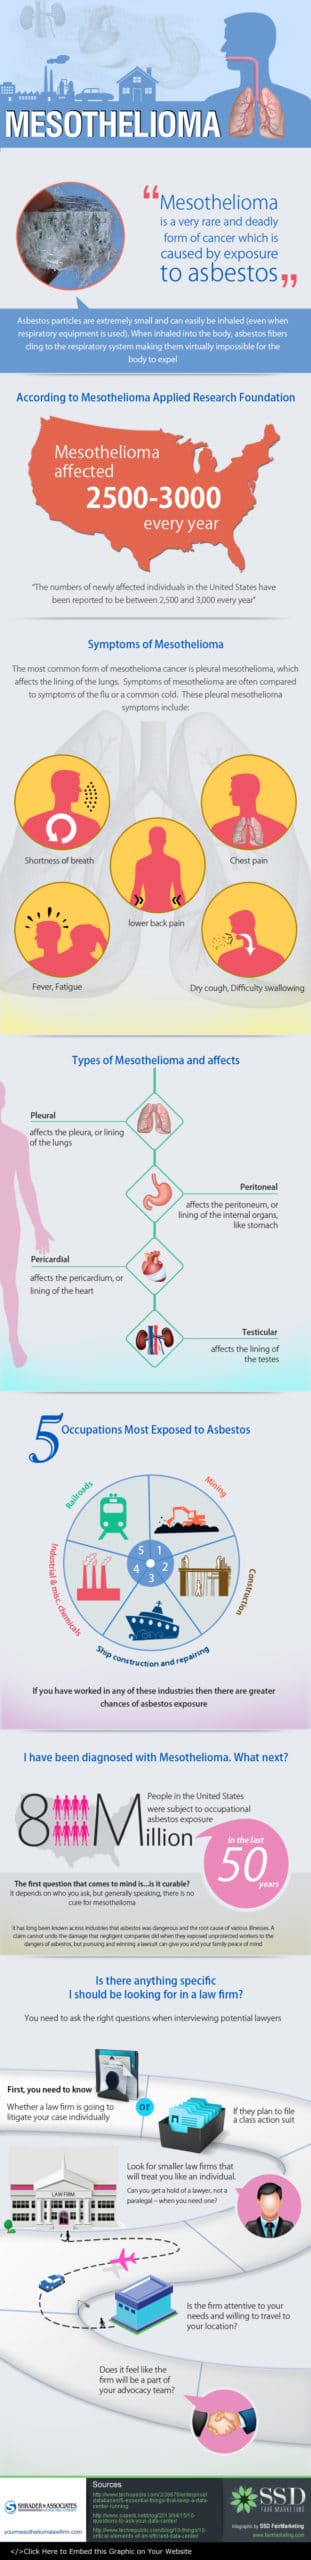 Mesothelioma Stages Infographic April 2015